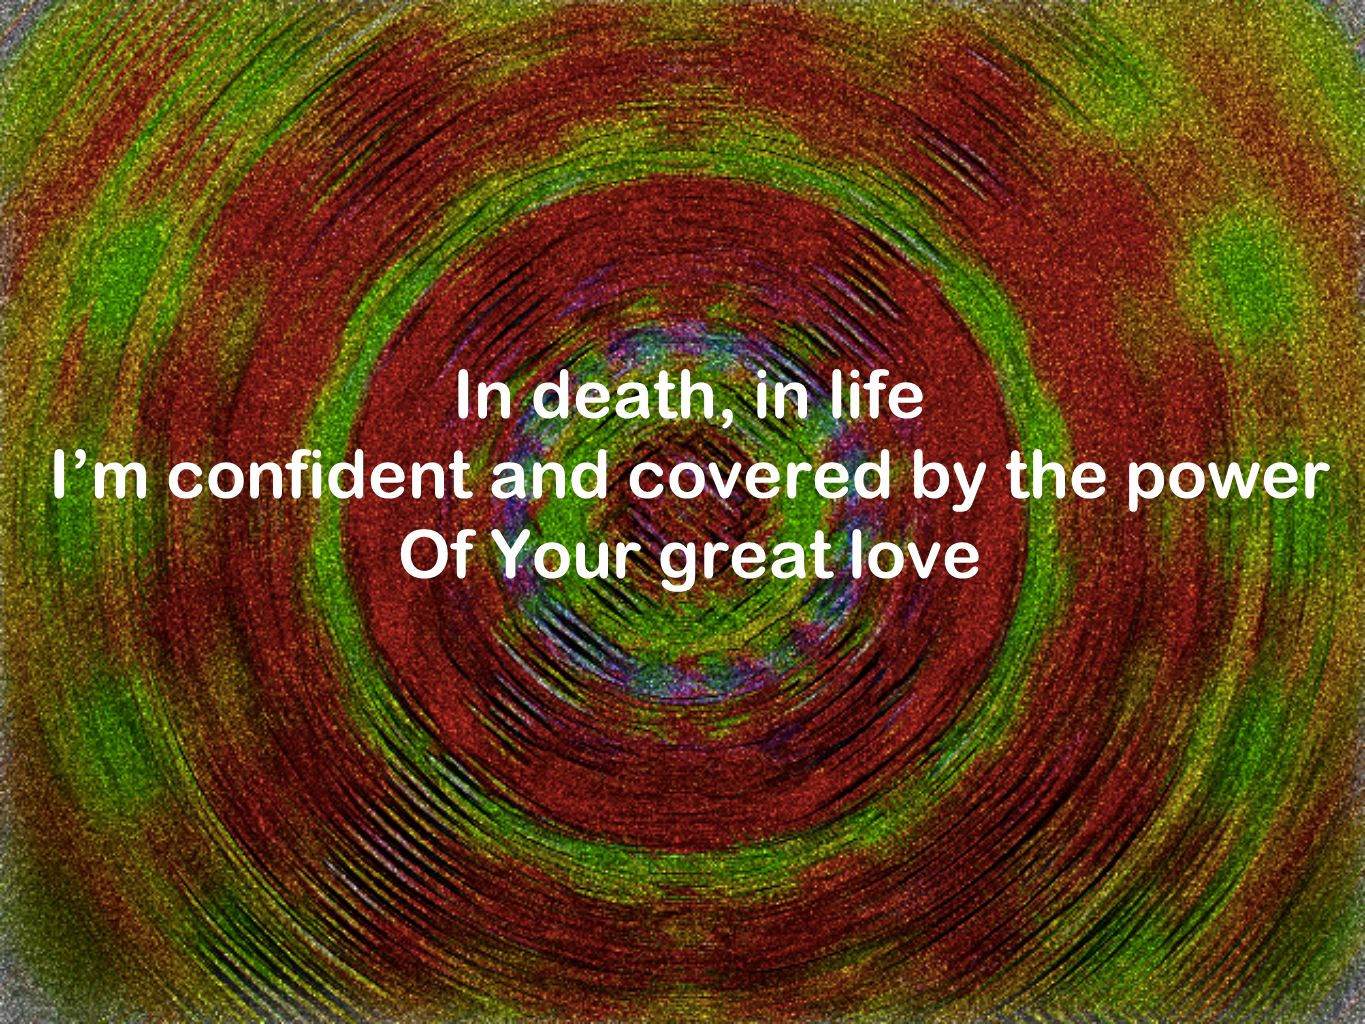 In death, in life I’m confident and covered by the power Of Your great love